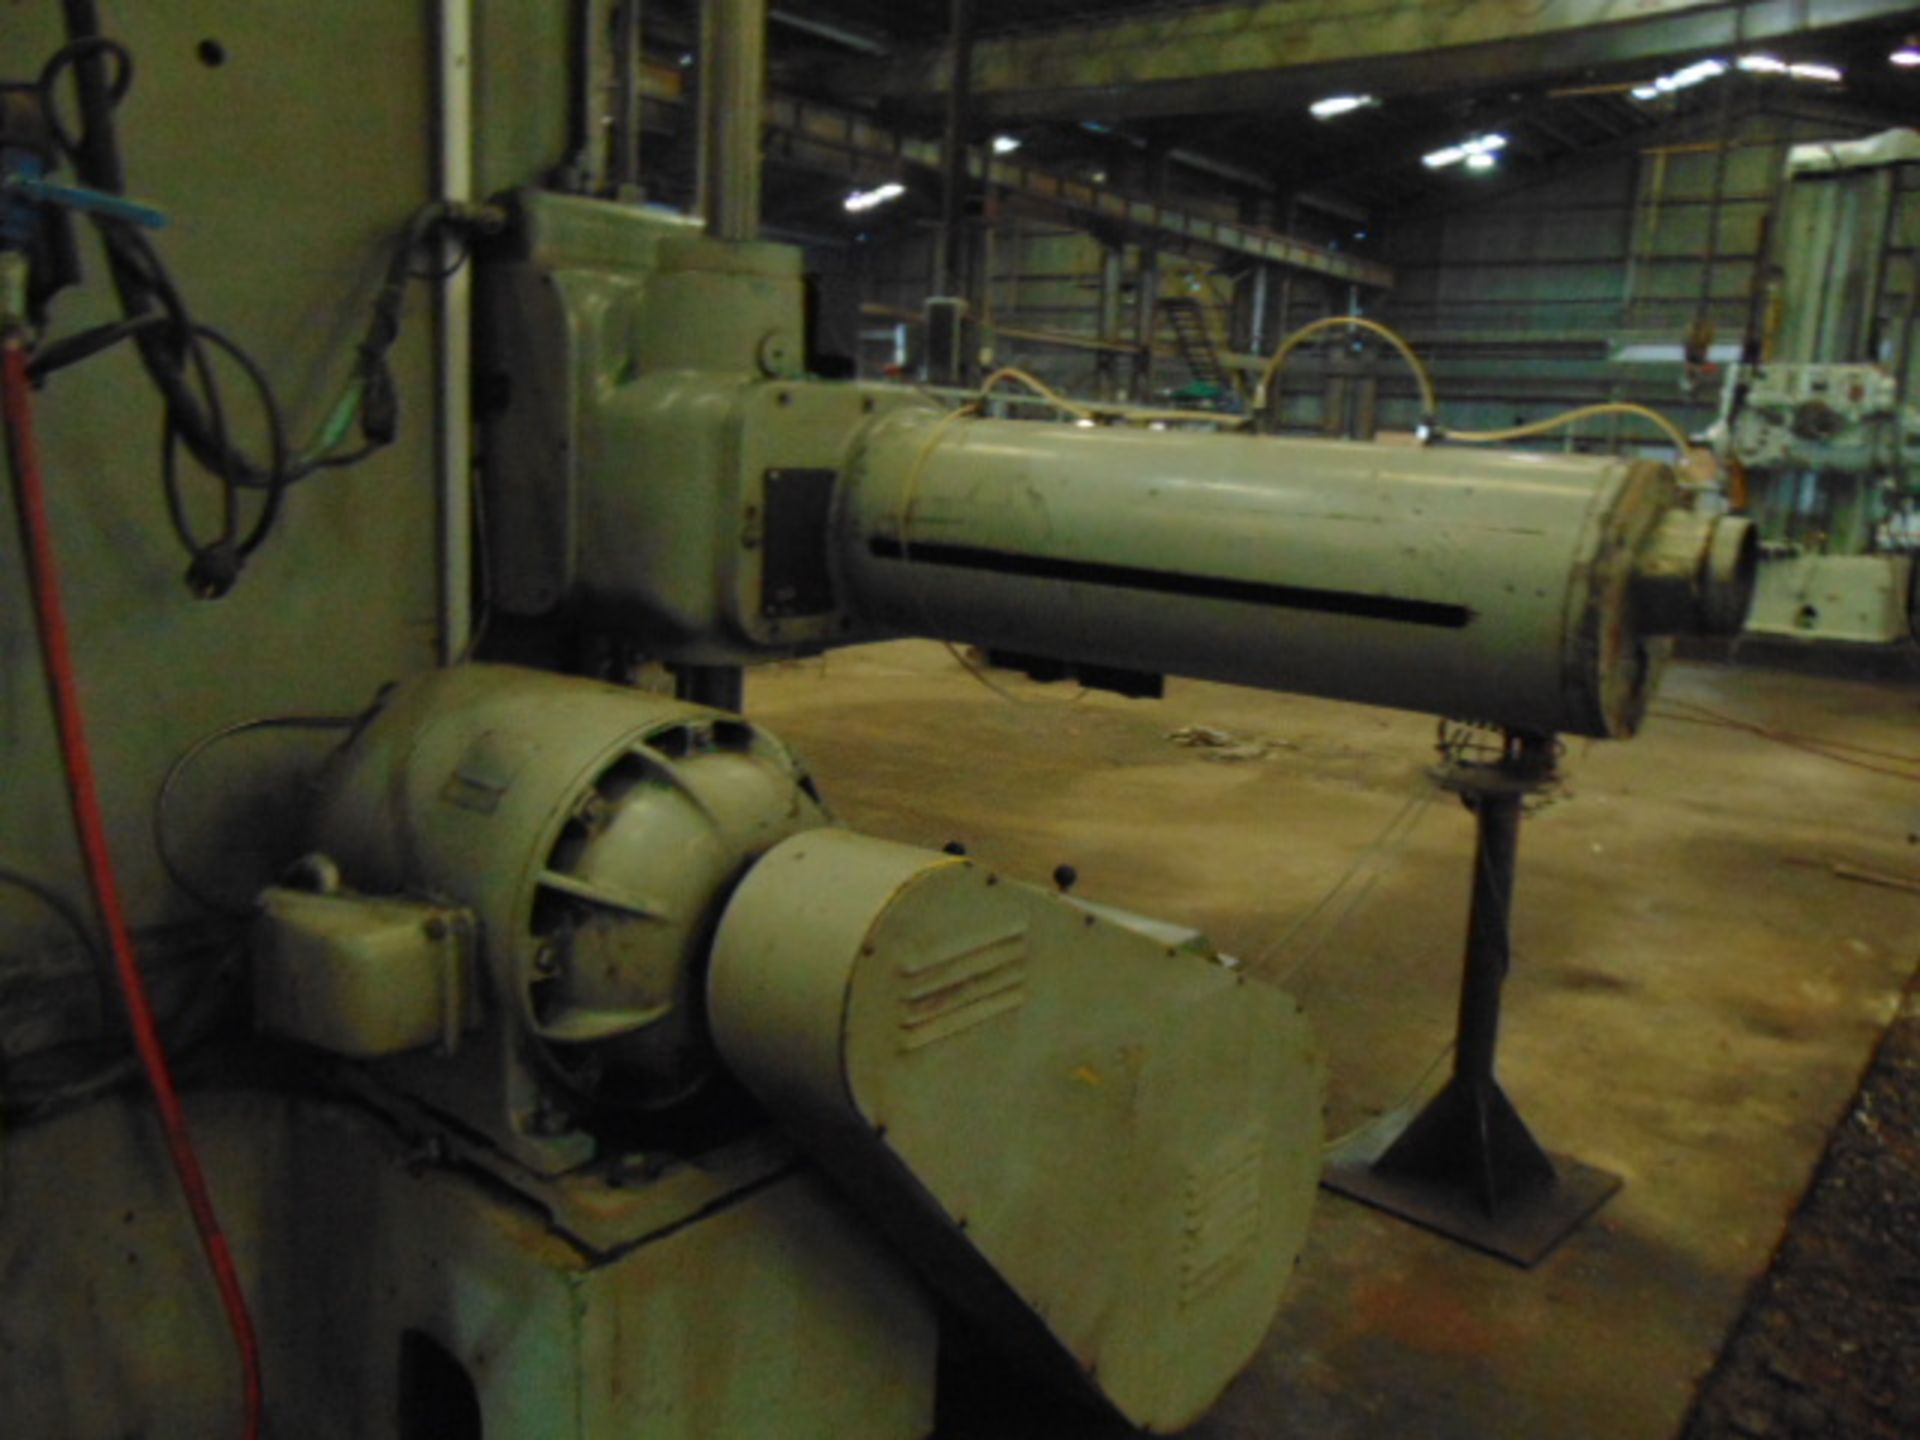 TABLE TYPE HORIZONTAL BORING MILL, LUCAS MDL. 428-60, 40" x 74" tbl., 60" cross travel, approx. - Image 11 of 16